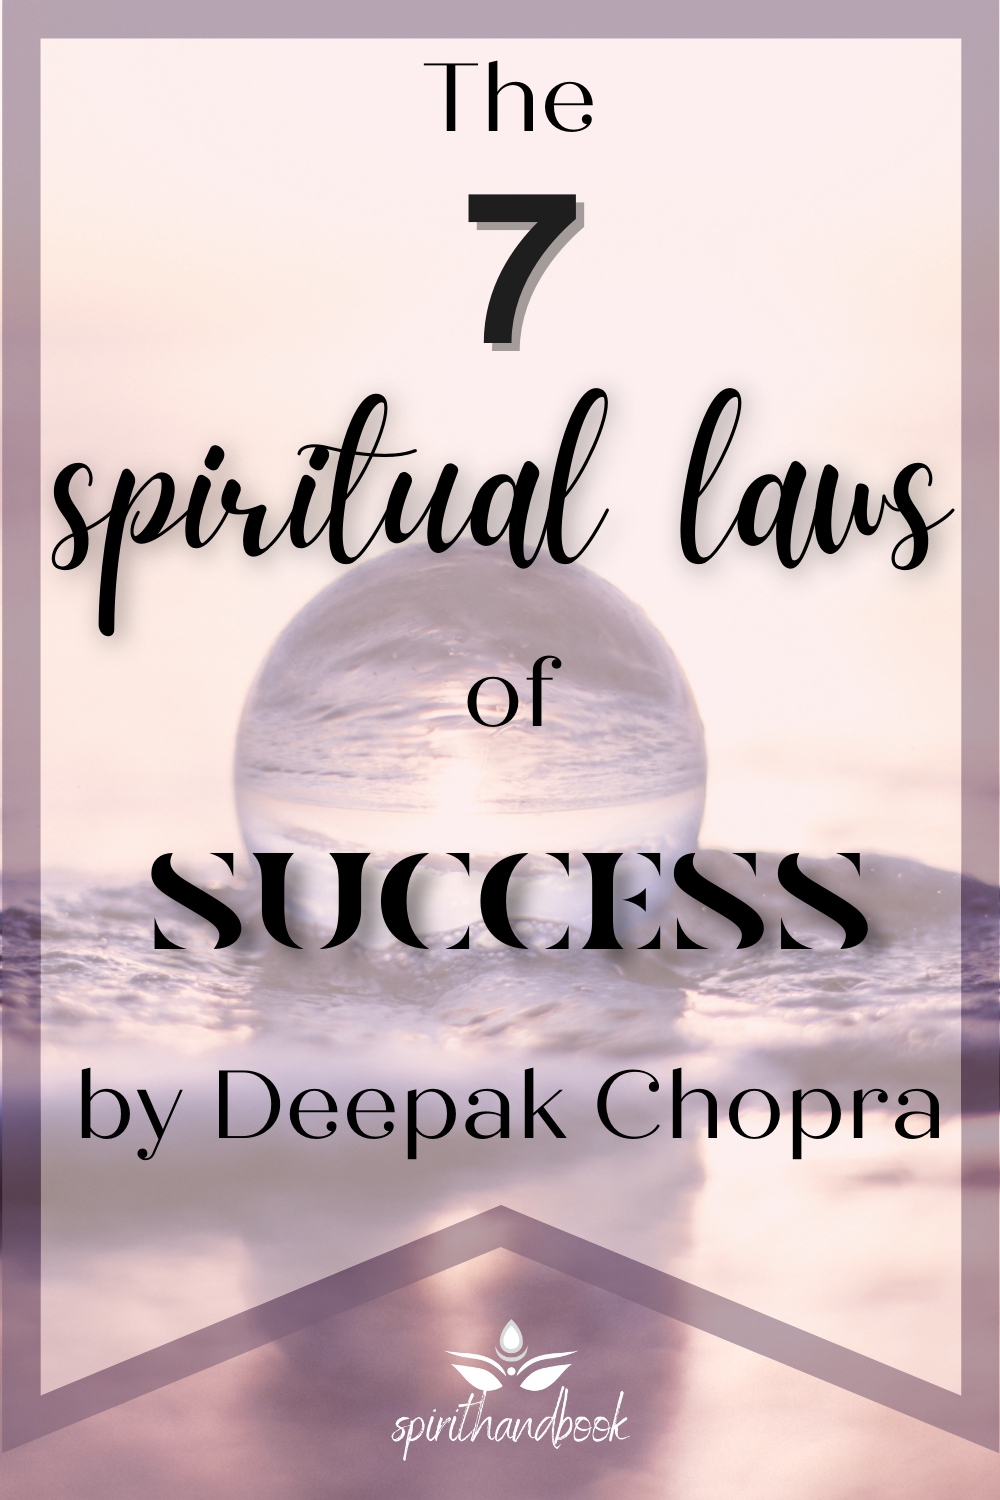 You are currently viewing “The 7 Spiritual Laws Of Success” by Deepak Chopra